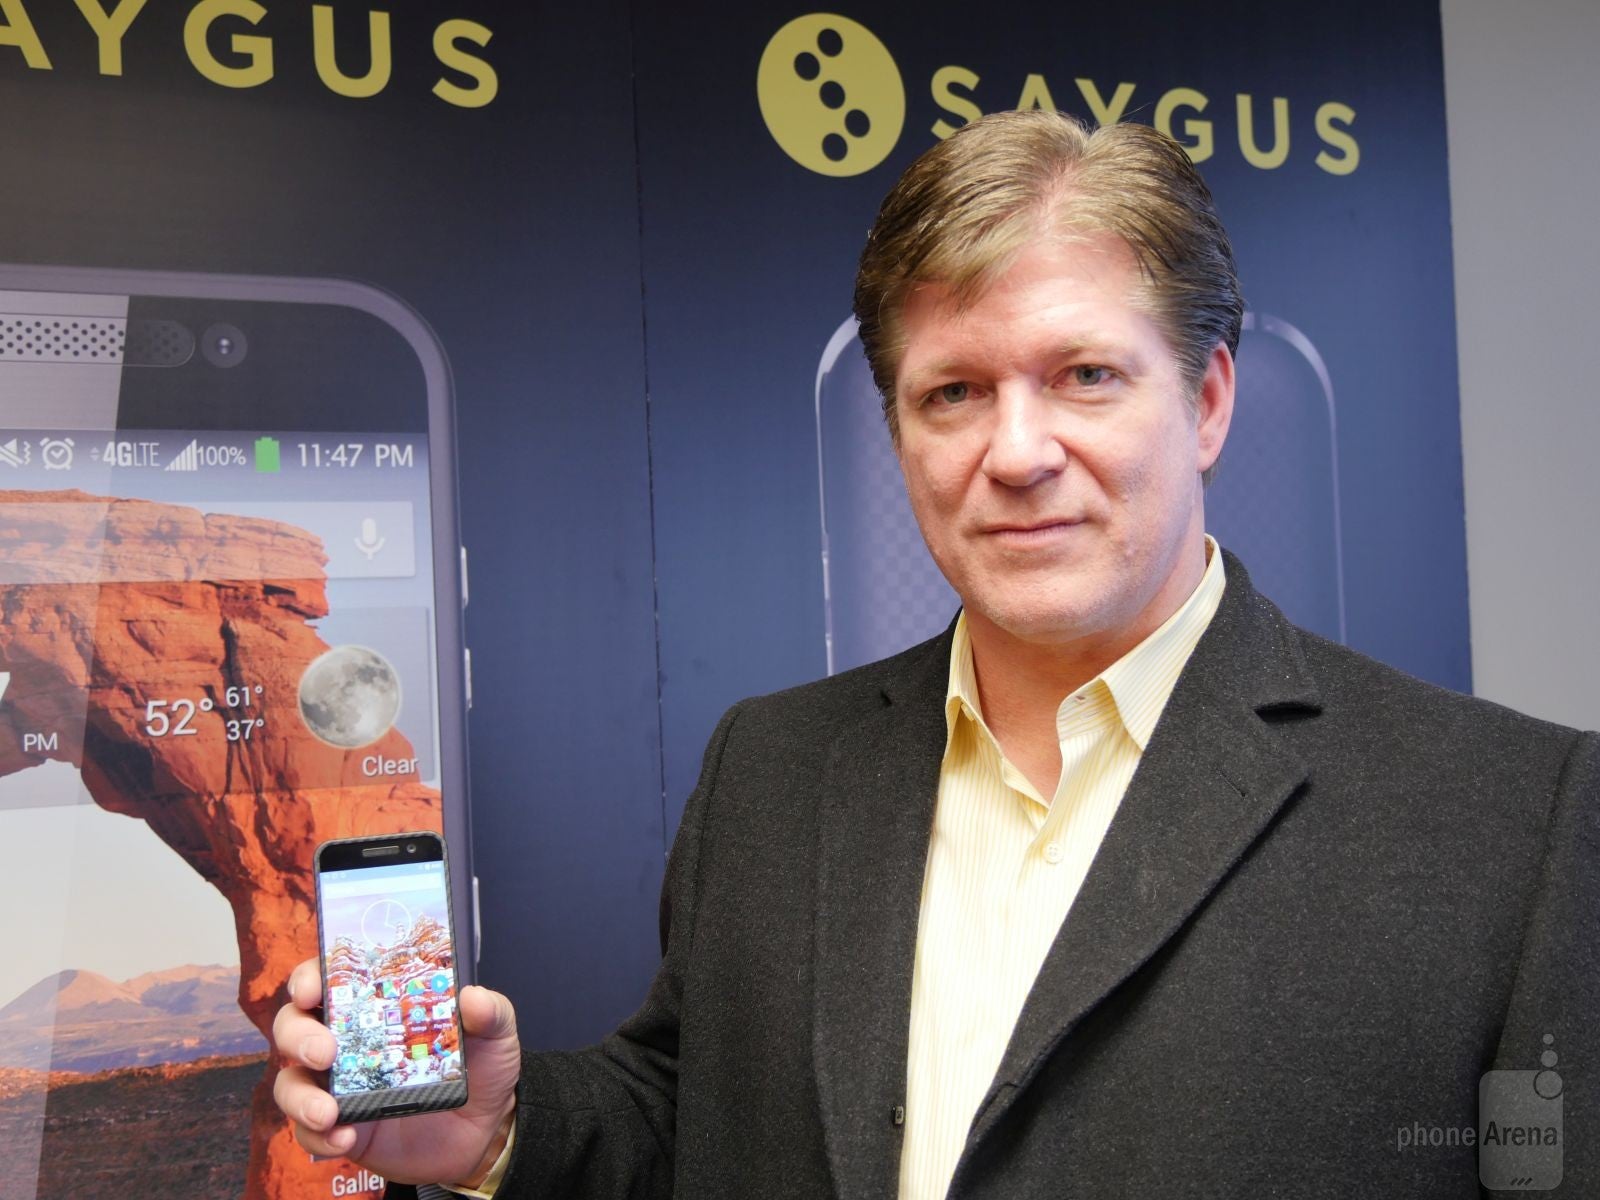 Saygus founder, Chad Sayers, is acutely aware of the firestorm over delays, but says not delivering is not an option.  - Remember Saygus? We got an exclusive sit-down with founder and CEO Chad Sayers